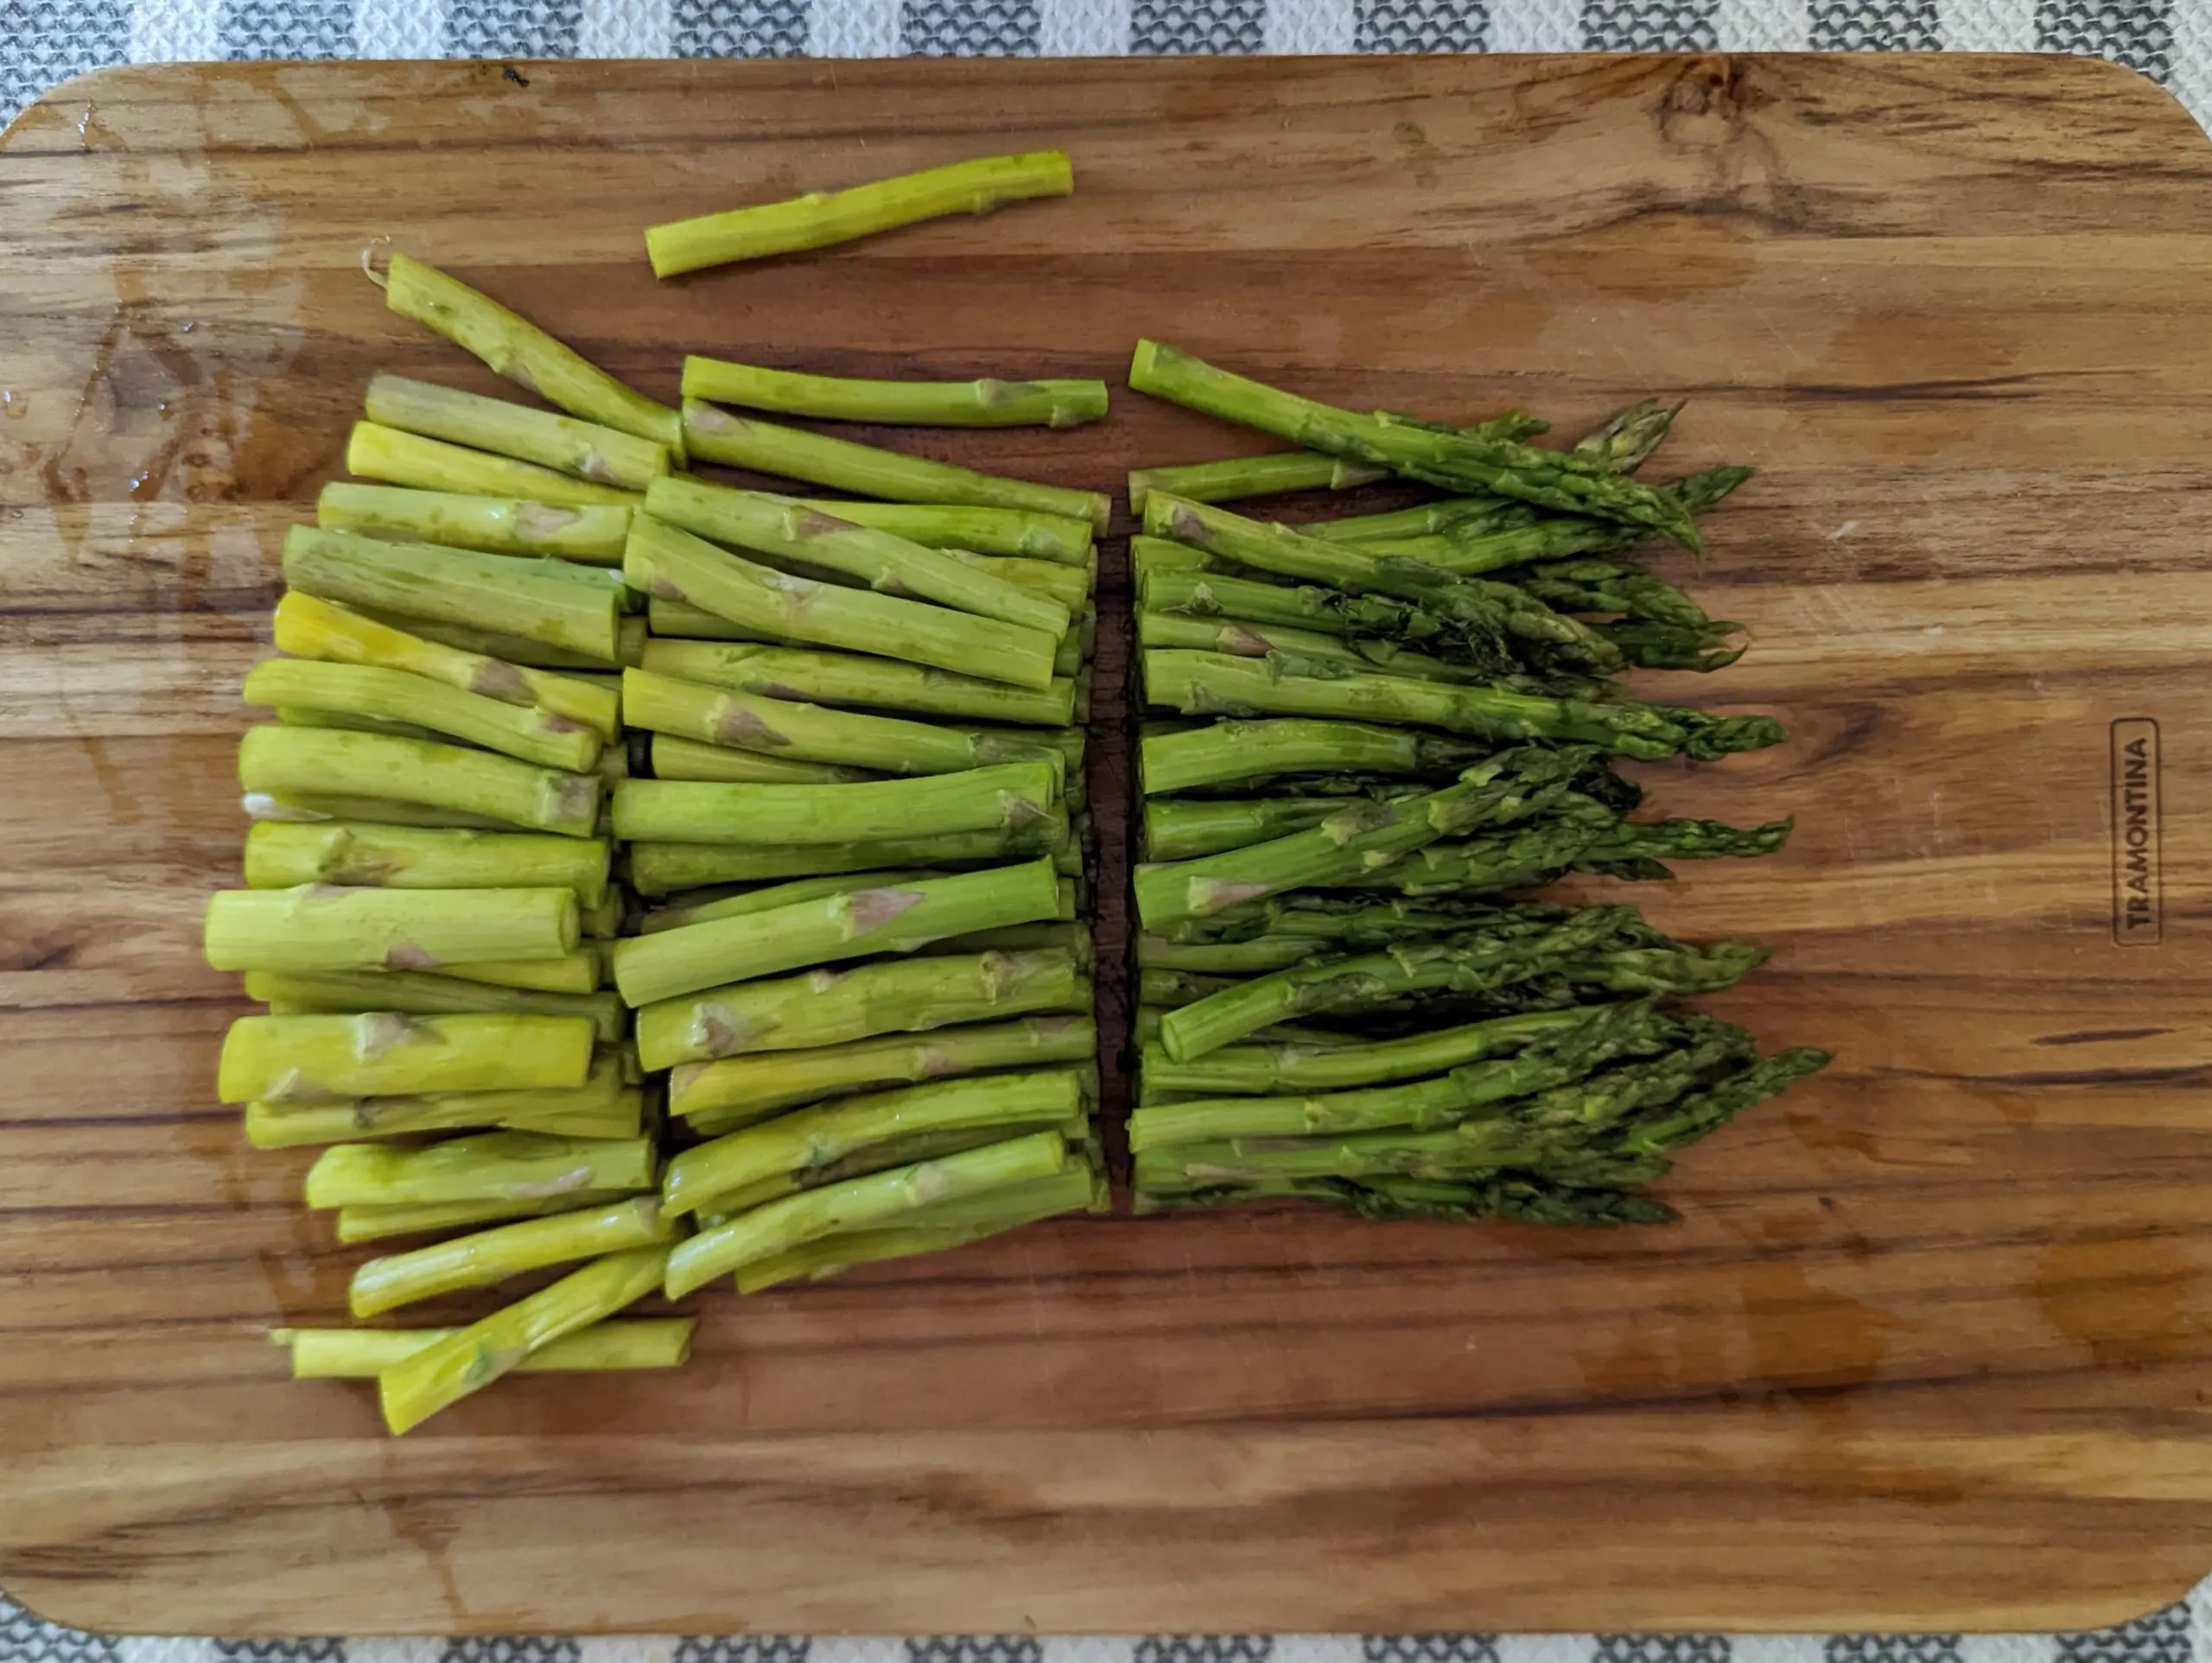 Cut the asparagus into 2-inch pieces.